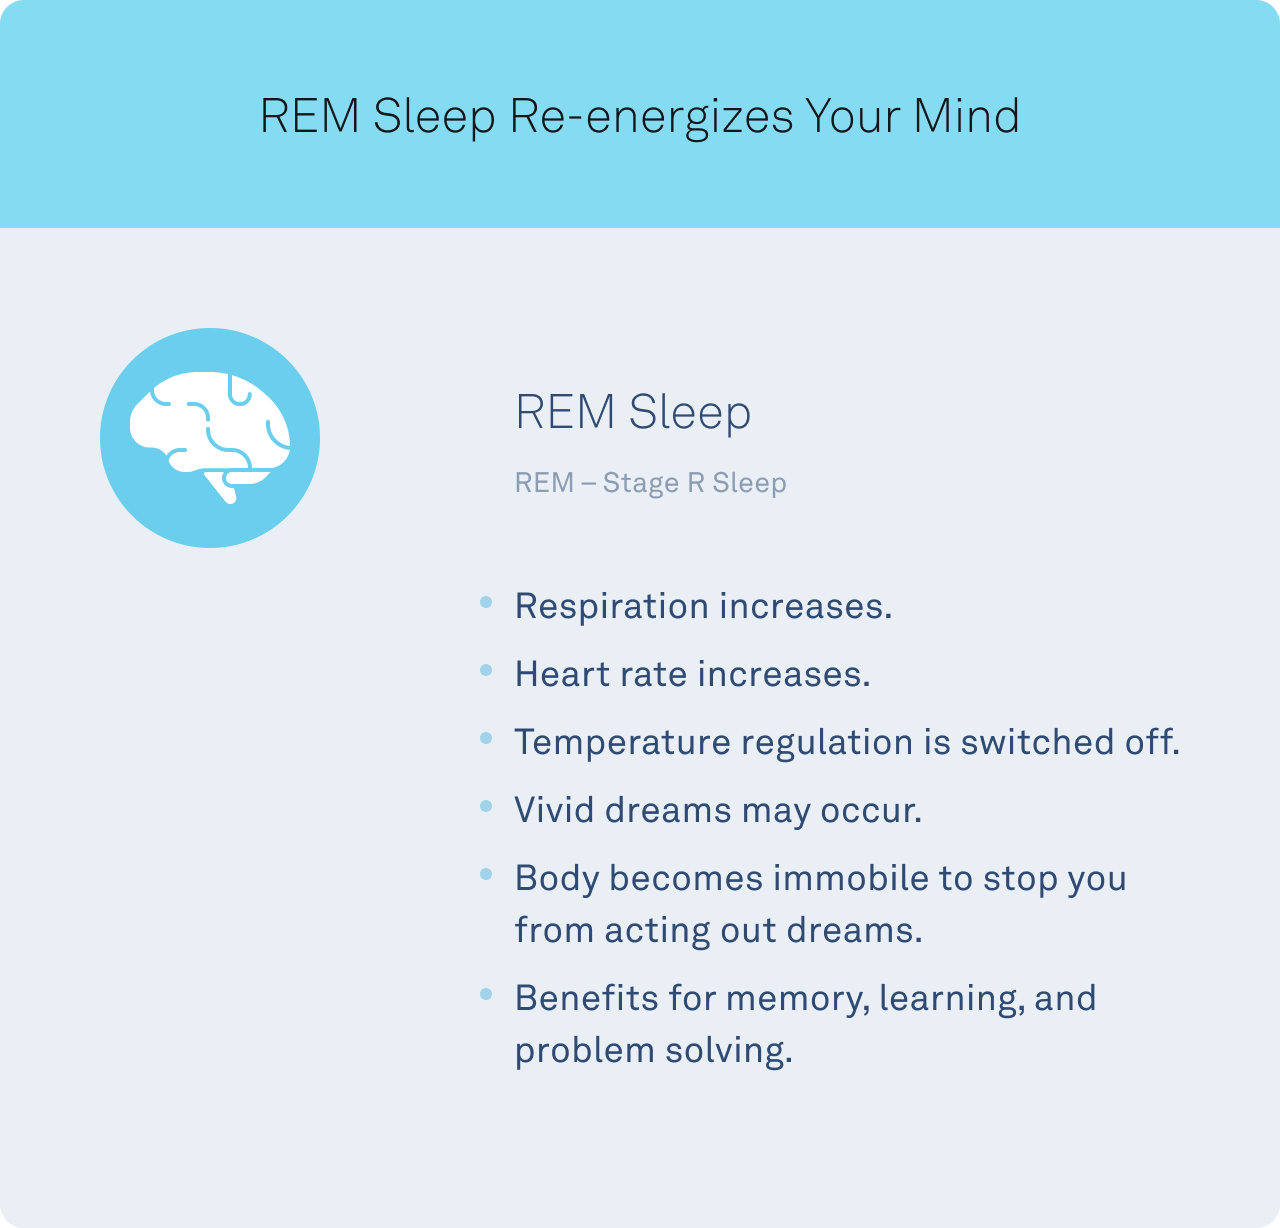 REM Sleep supports your brain. During REM, vivid dreams occur and your body becomes immobile to stop you acting out your dreams. It also improves memory, learning, and problem solving.